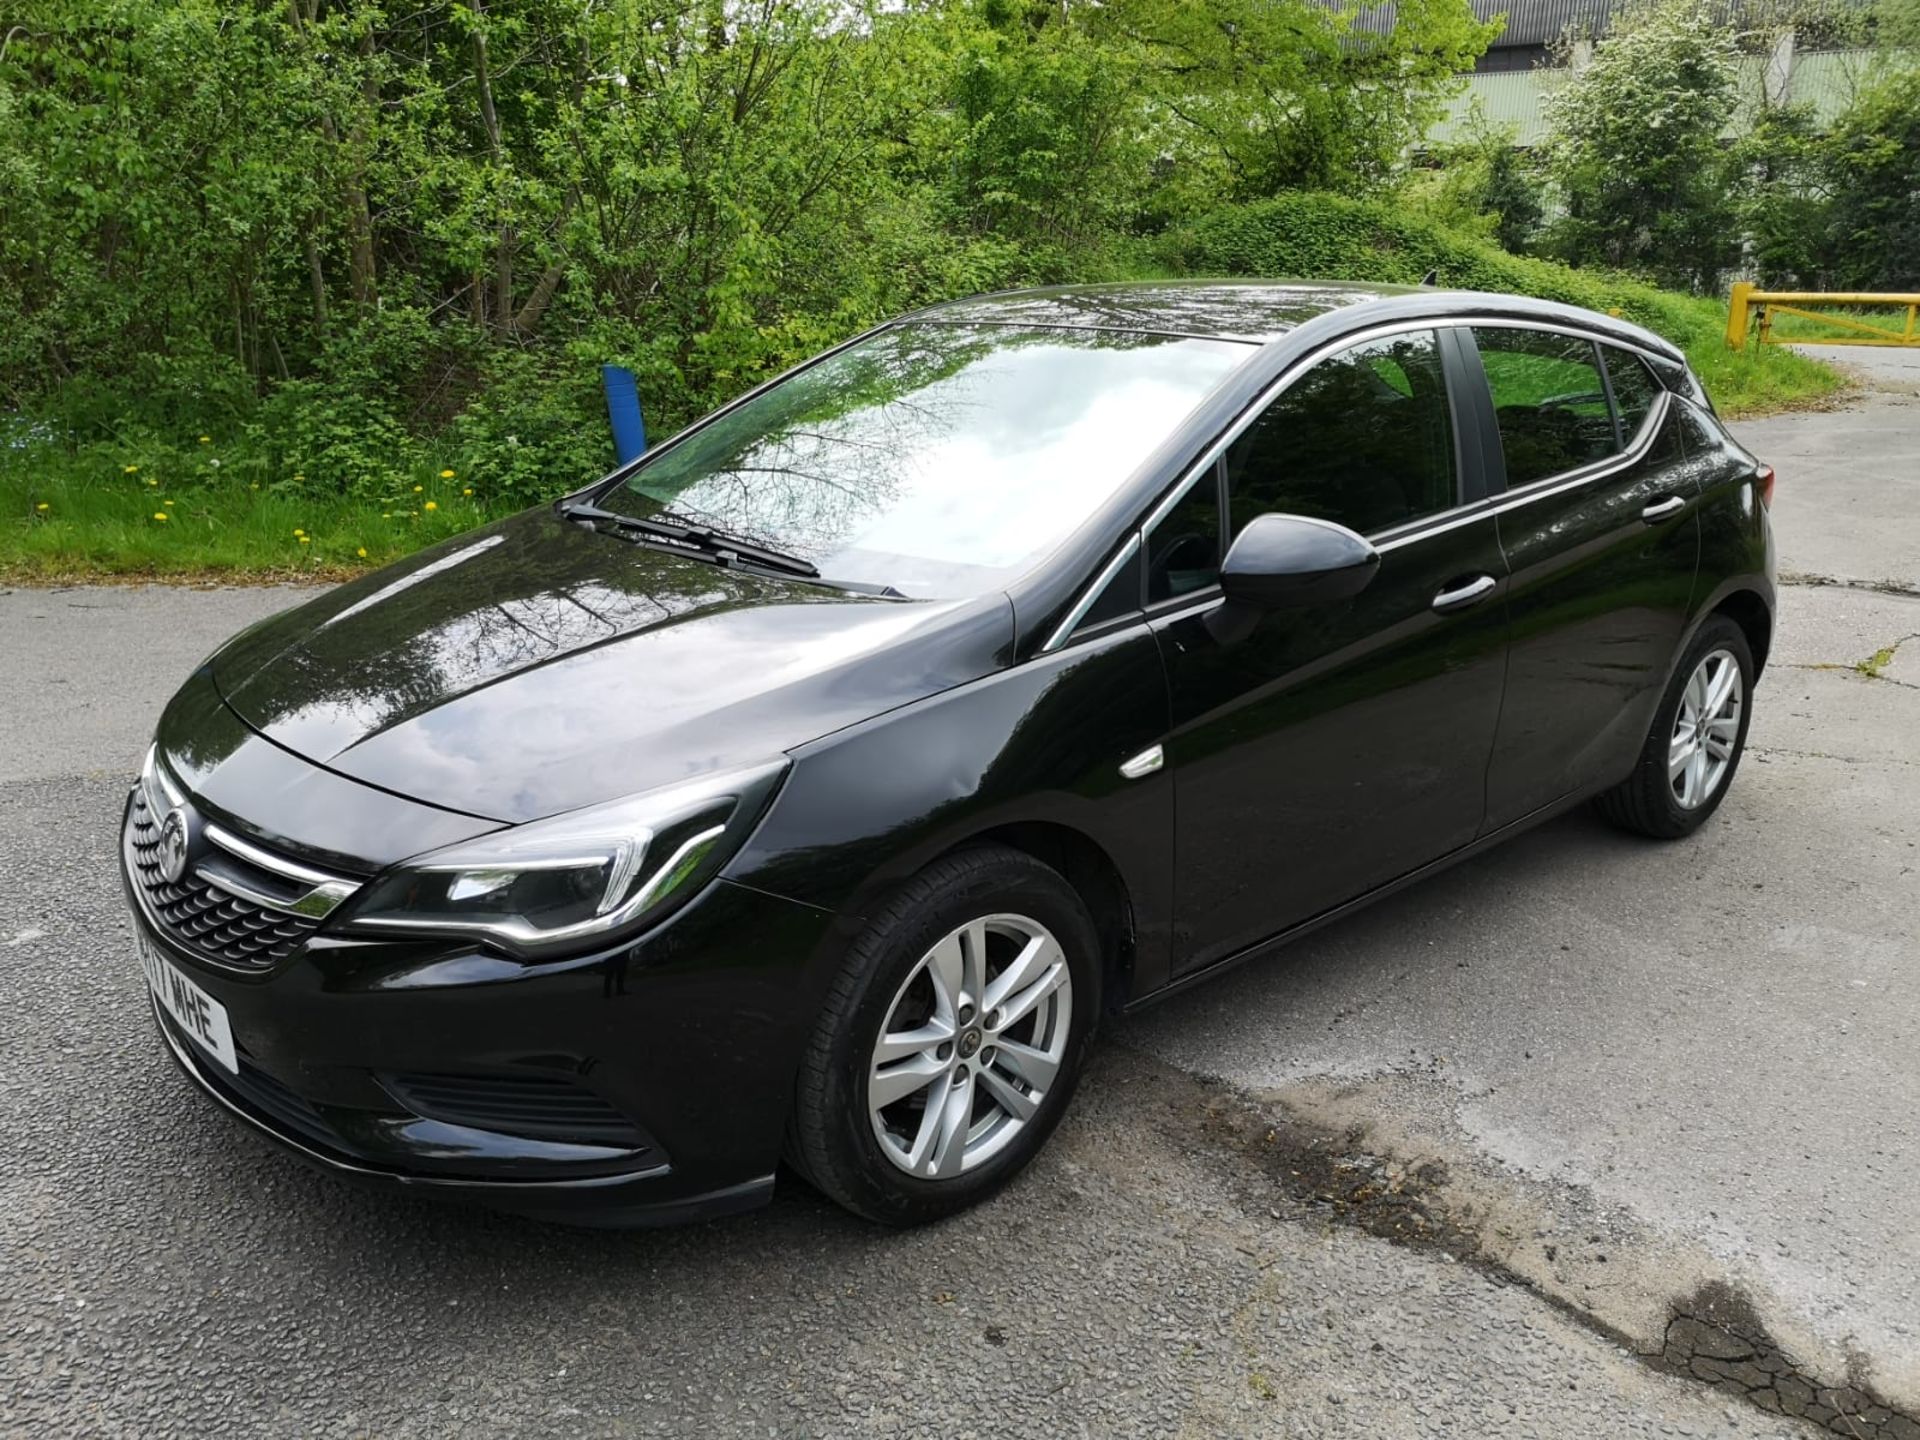 2017/17 REG VAUXHALL ASTRA TECH LINE TURBO S/S 1.4 PETROL AUTOMATIC, SHOWING 1 FORMER KEEPER - Image 3 of 14